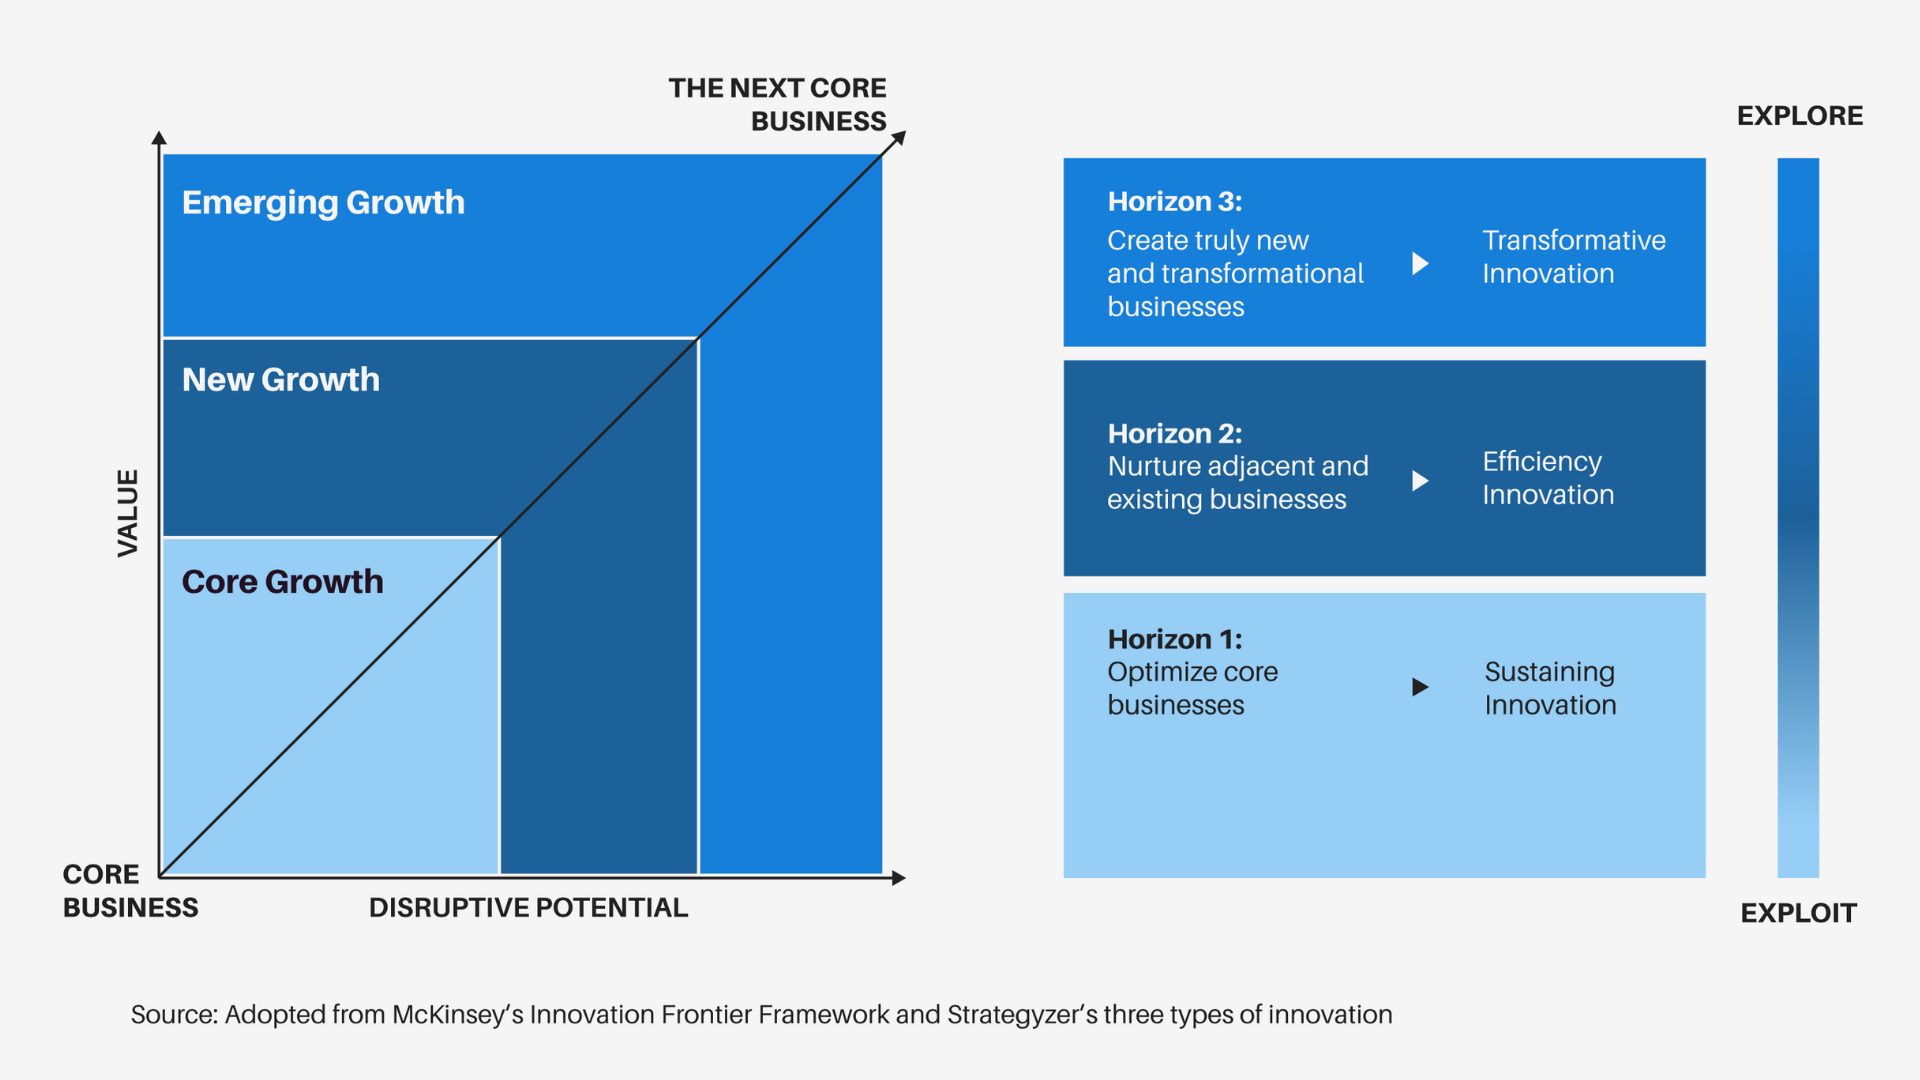 Venture building is within the third horizon of innovation.